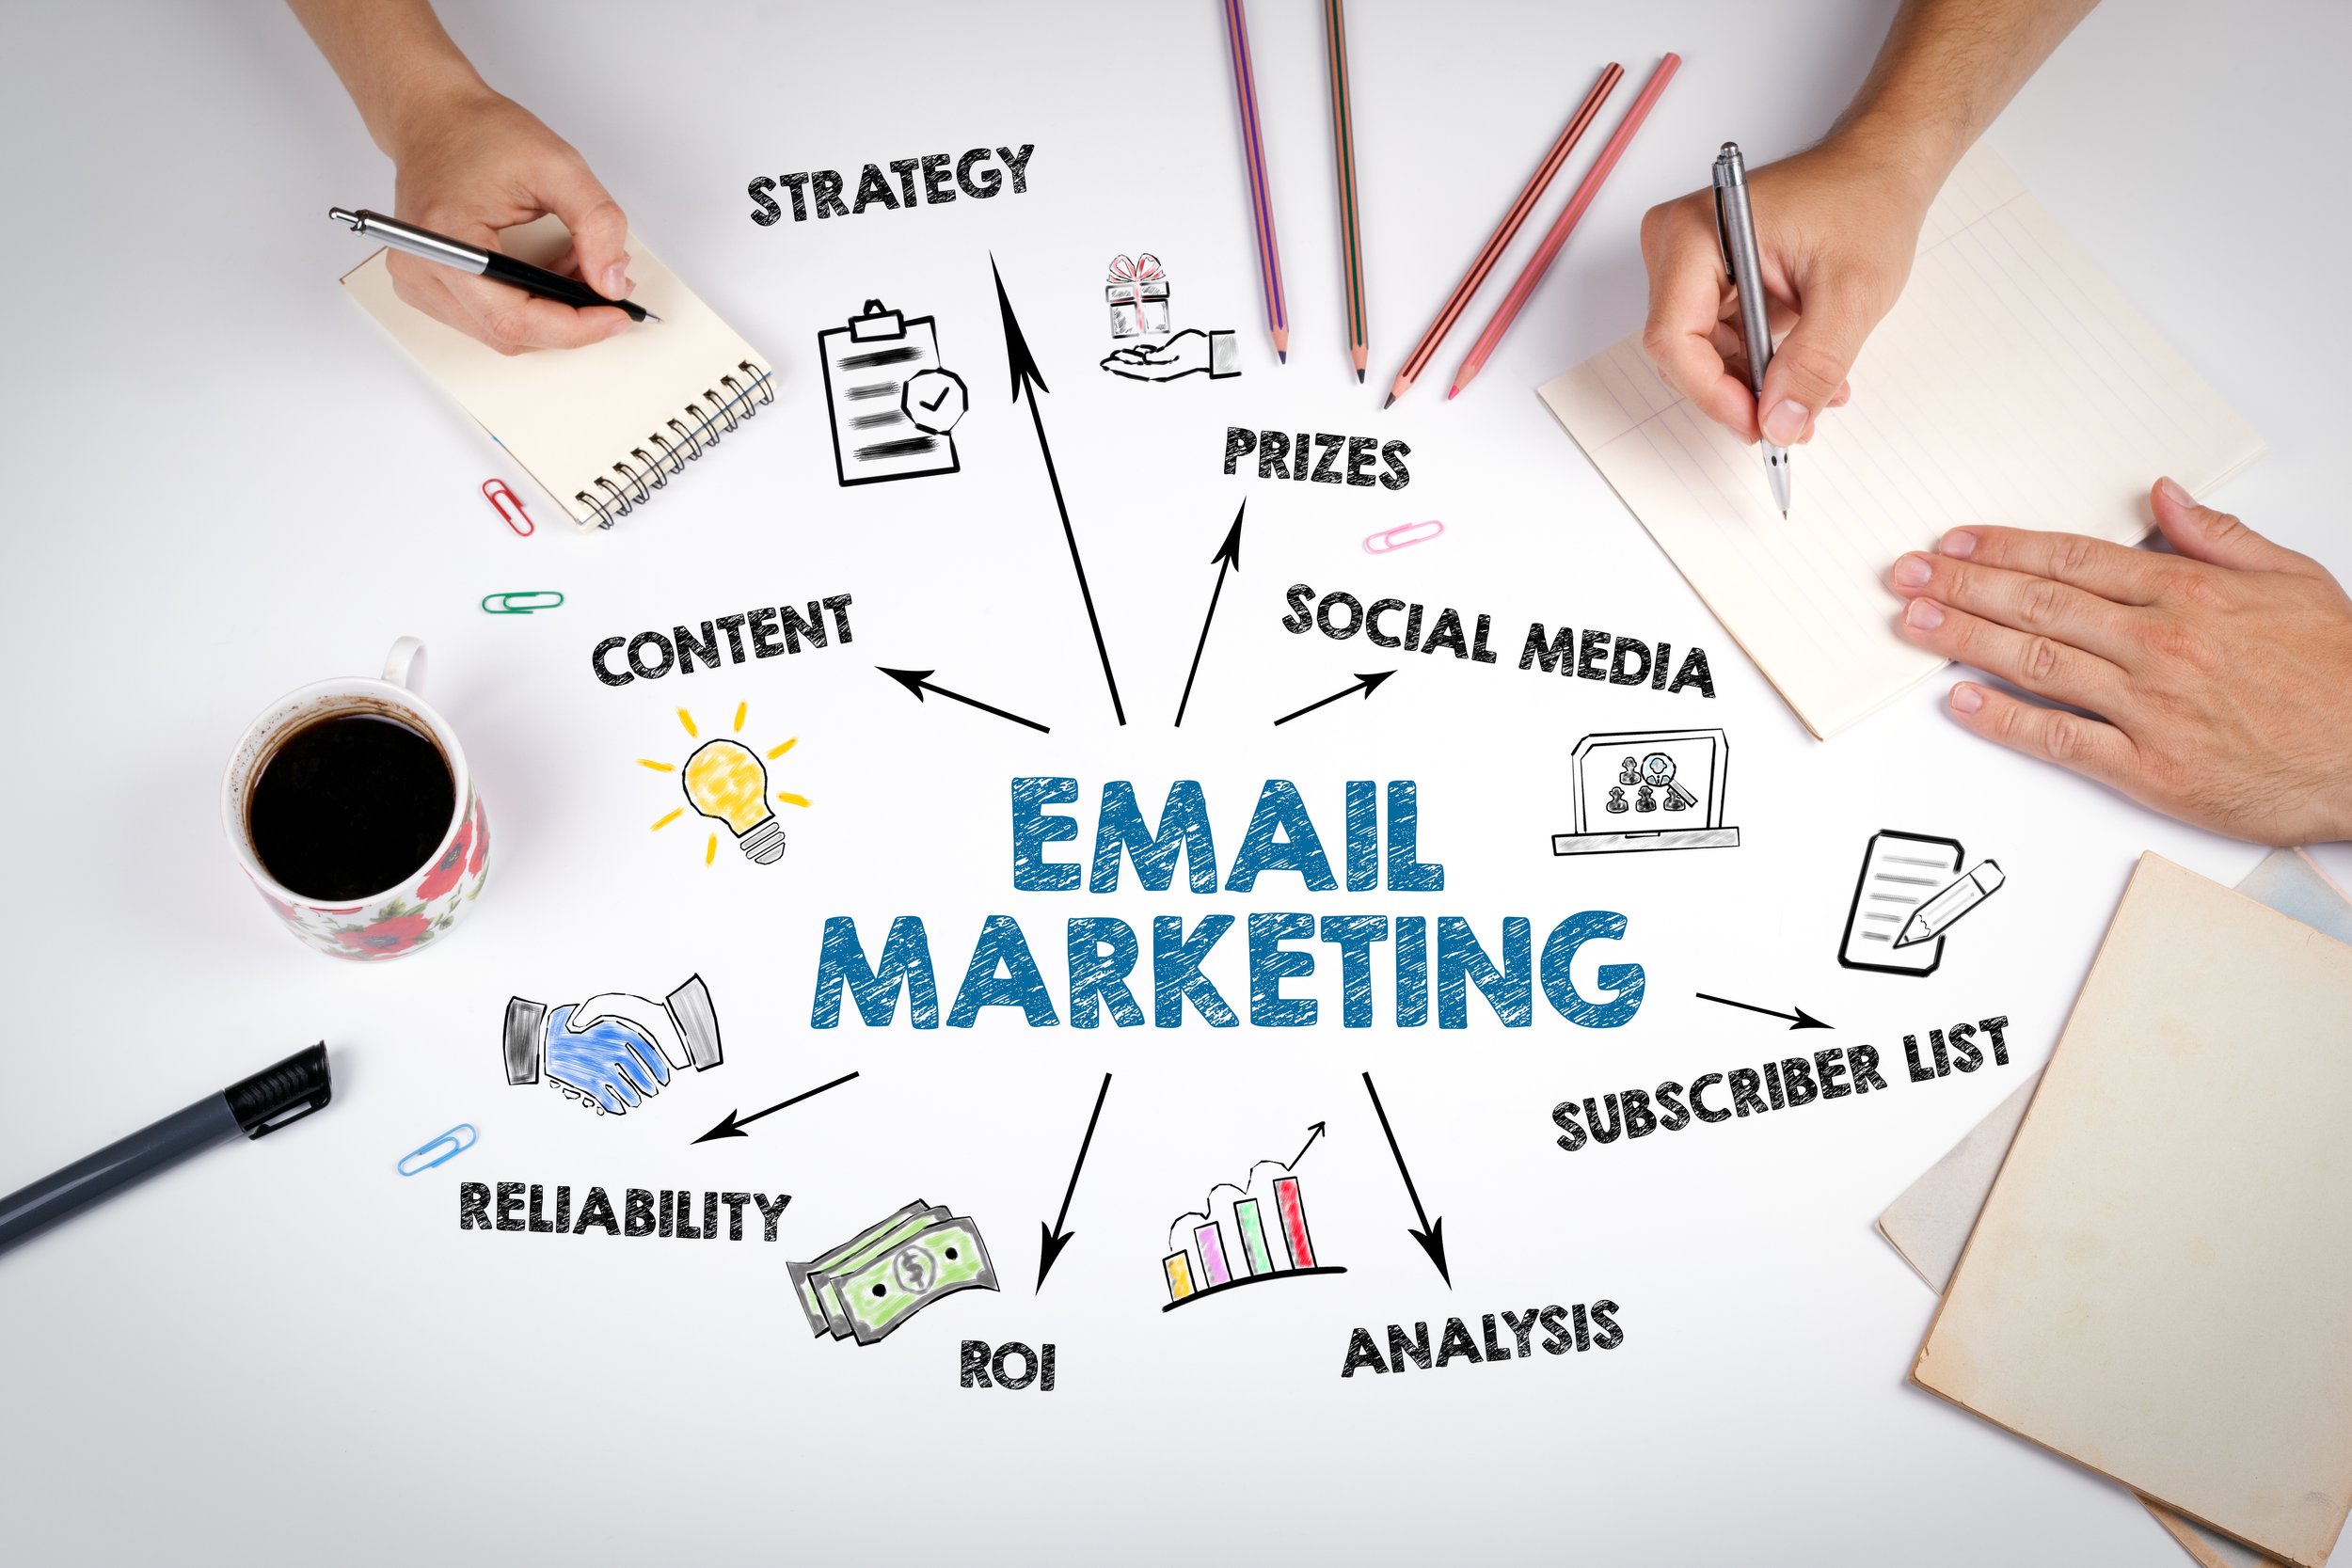 How to Build Effective Email Marketing Campaigns and Boost Your ROI?